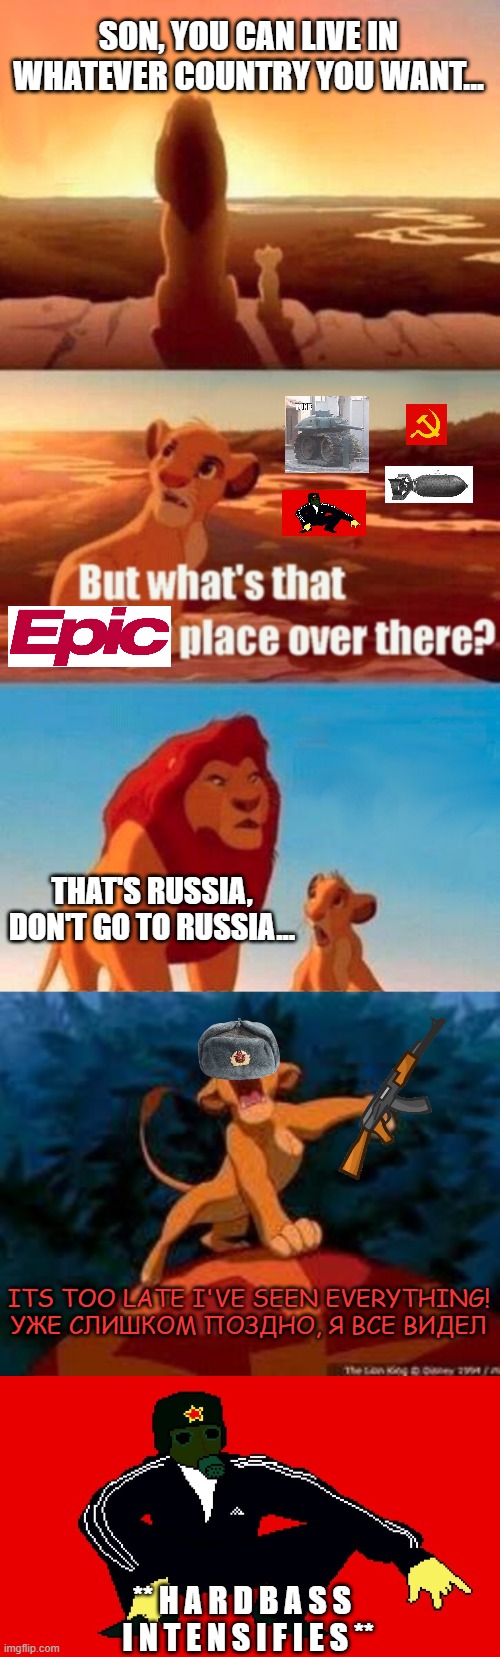 epic. | SON, YOU CAN LIVE IN WHATEVER COUNTRY YOU WANT... THAT'S RUSSIA, DON'T GO TO RUSSIA... ITS TOO LATE I'VE SEEN EVERYTHING!

УЖЕ СЛИШКОМ ПОЗДНО, Я ВСЕ ВИДЕЛ; ** H A R D B A S S   I N T E N S I F I E S ** | image tagged in memes,simba shadowy place,i just can't wait to be king,russia,russian,epic | made w/ Imgflip meme maker